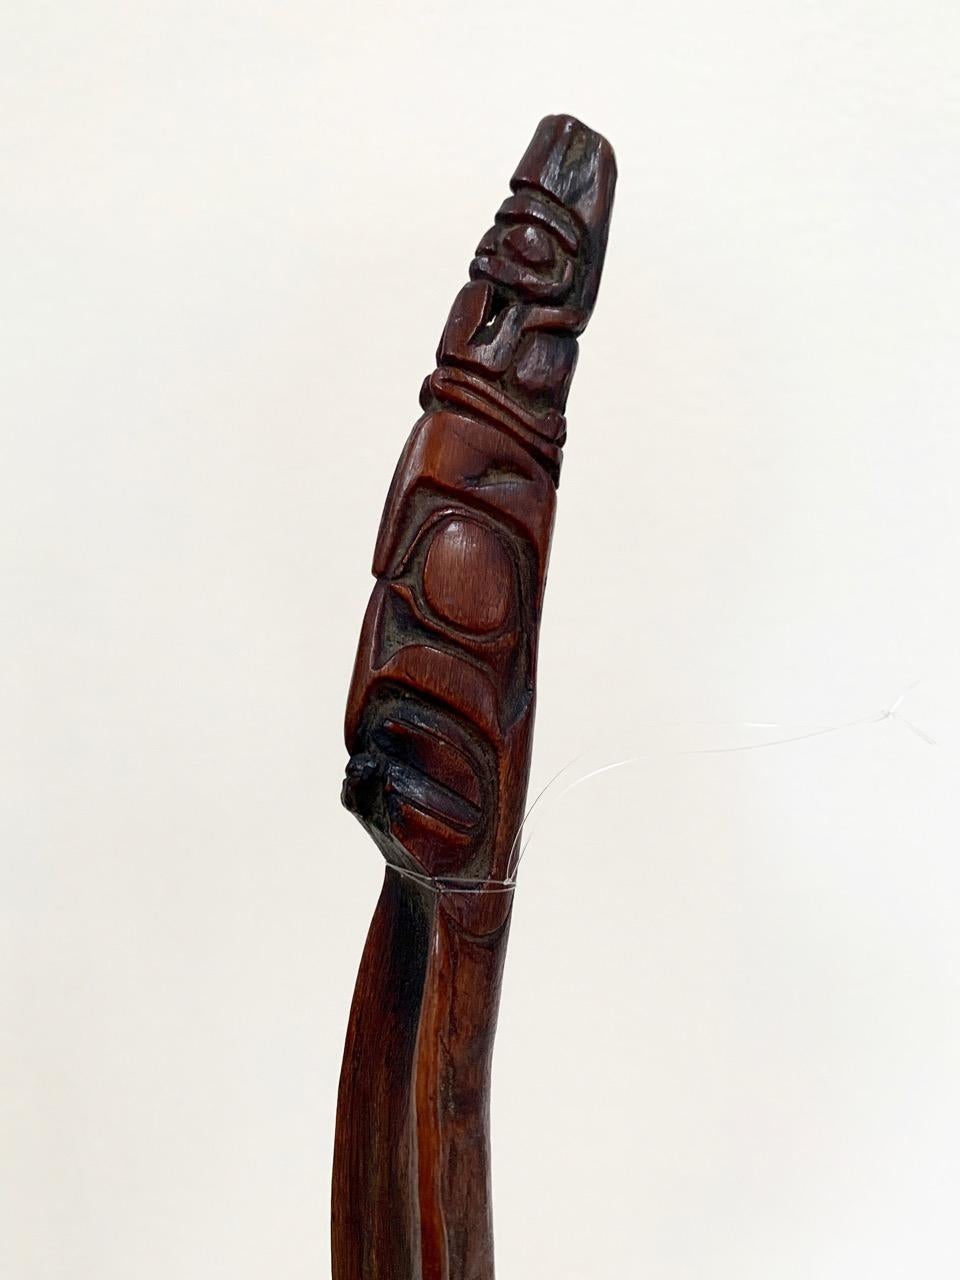 Monumental Northwest Coast Feast Ladle In Excellent Condition For Sale In Santa Fe, NM